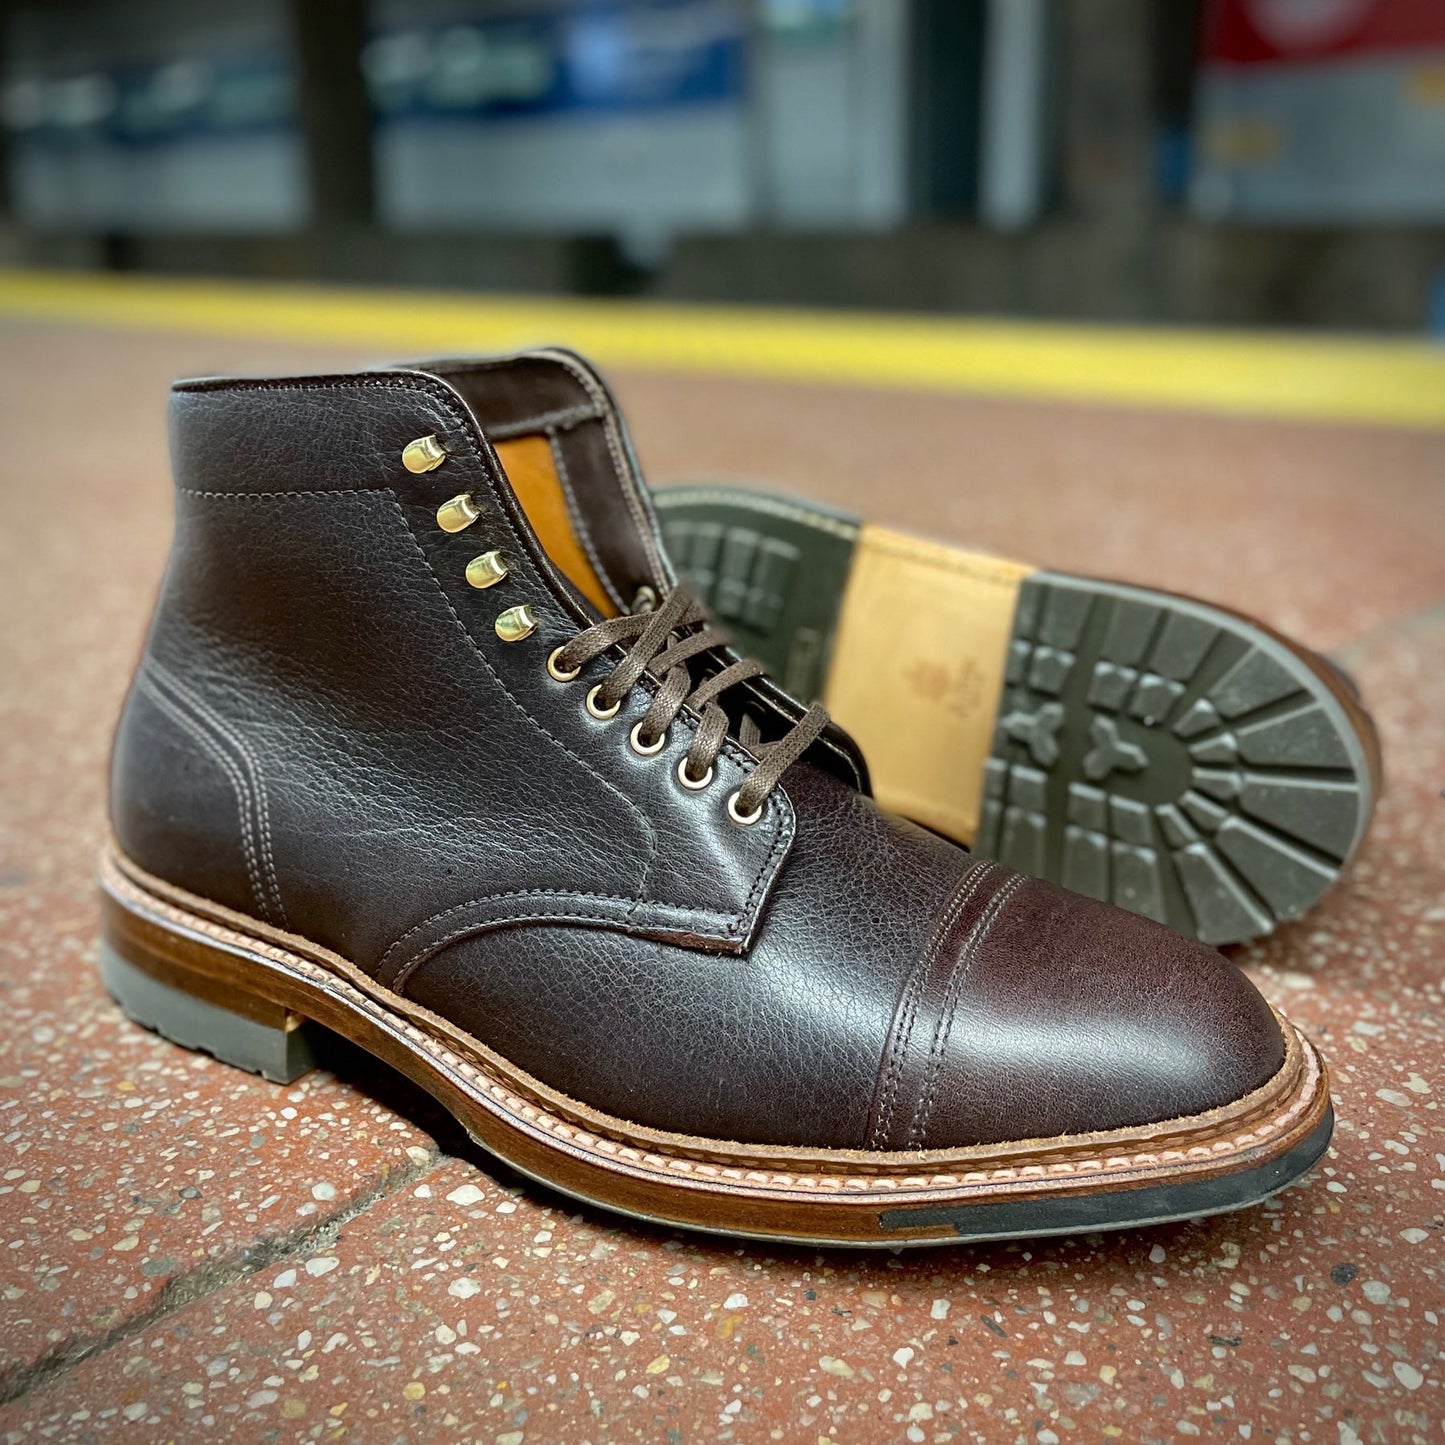 D1808HC - Stitchup 2/2 Boot in Arabica Lux